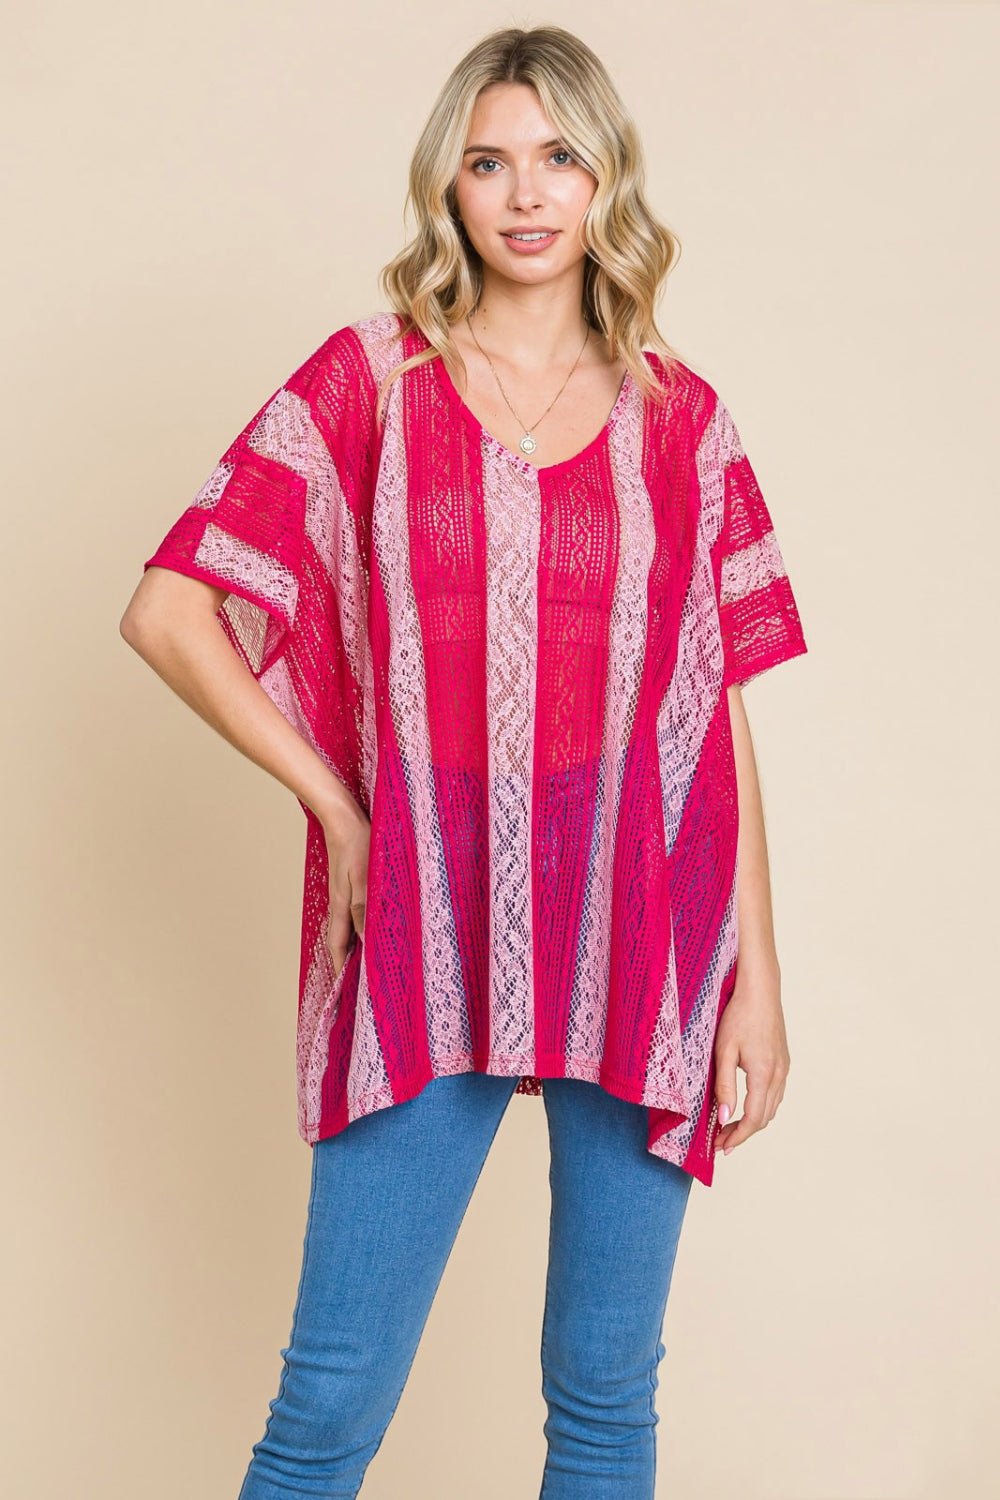 Striped Lace Cover-Up Top in FuchsiaTopCotton Bleu